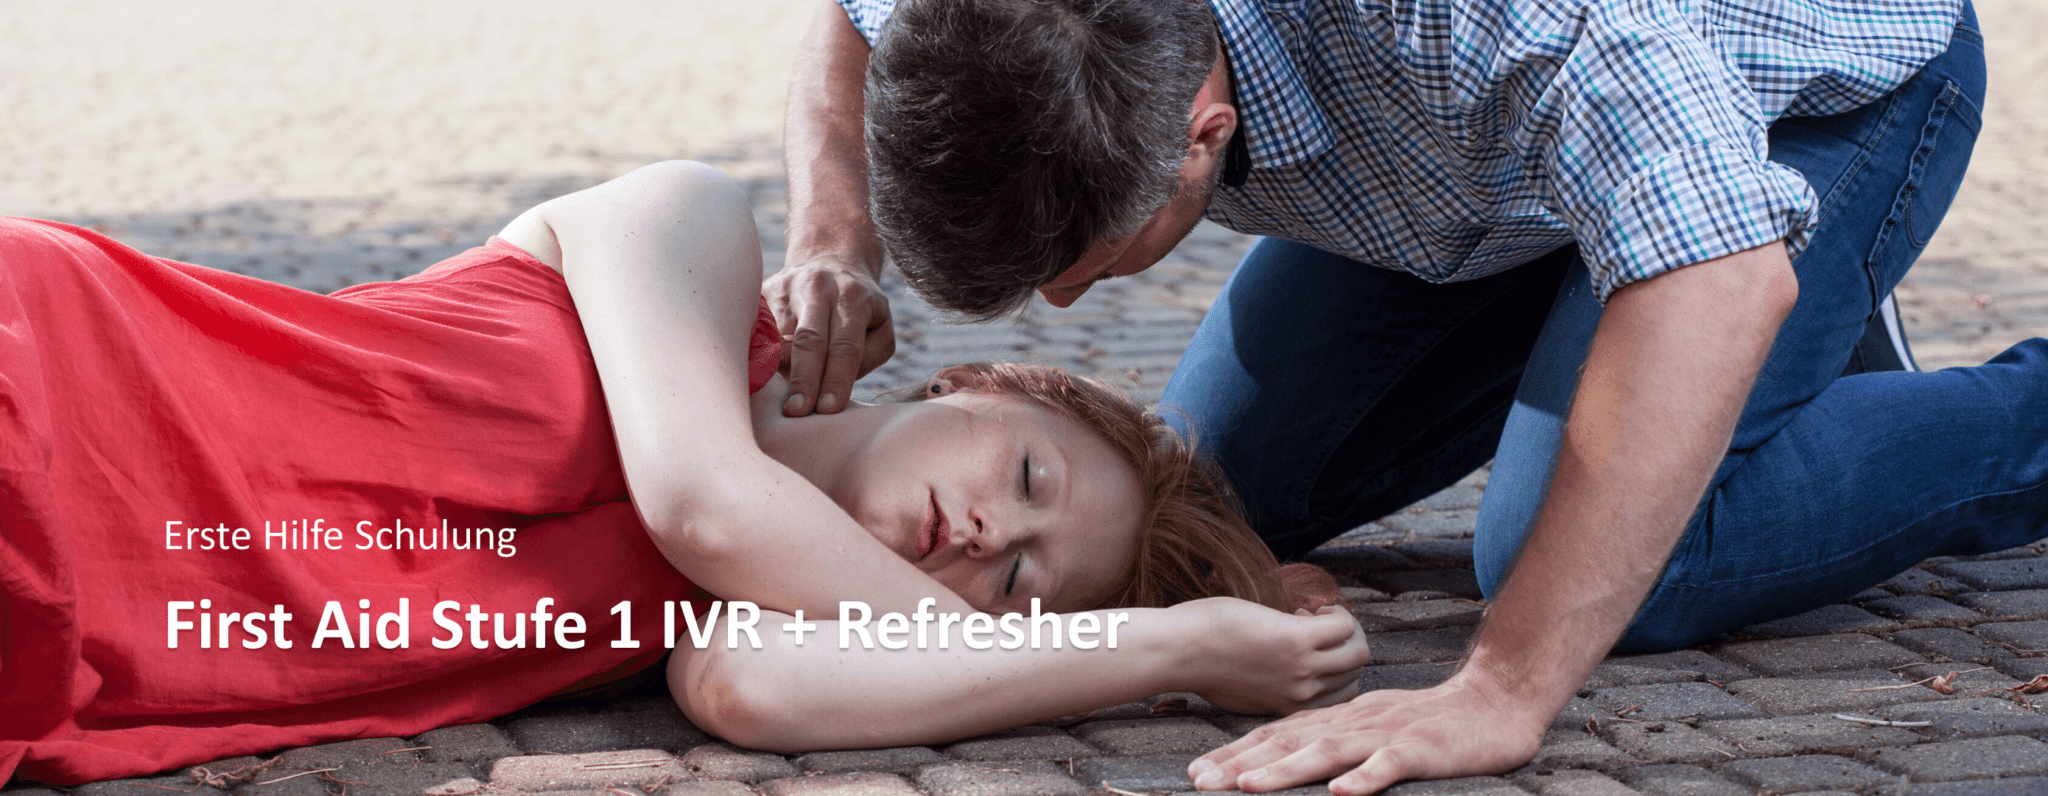 Lifetec AG First Aid Stufe 1 IVR